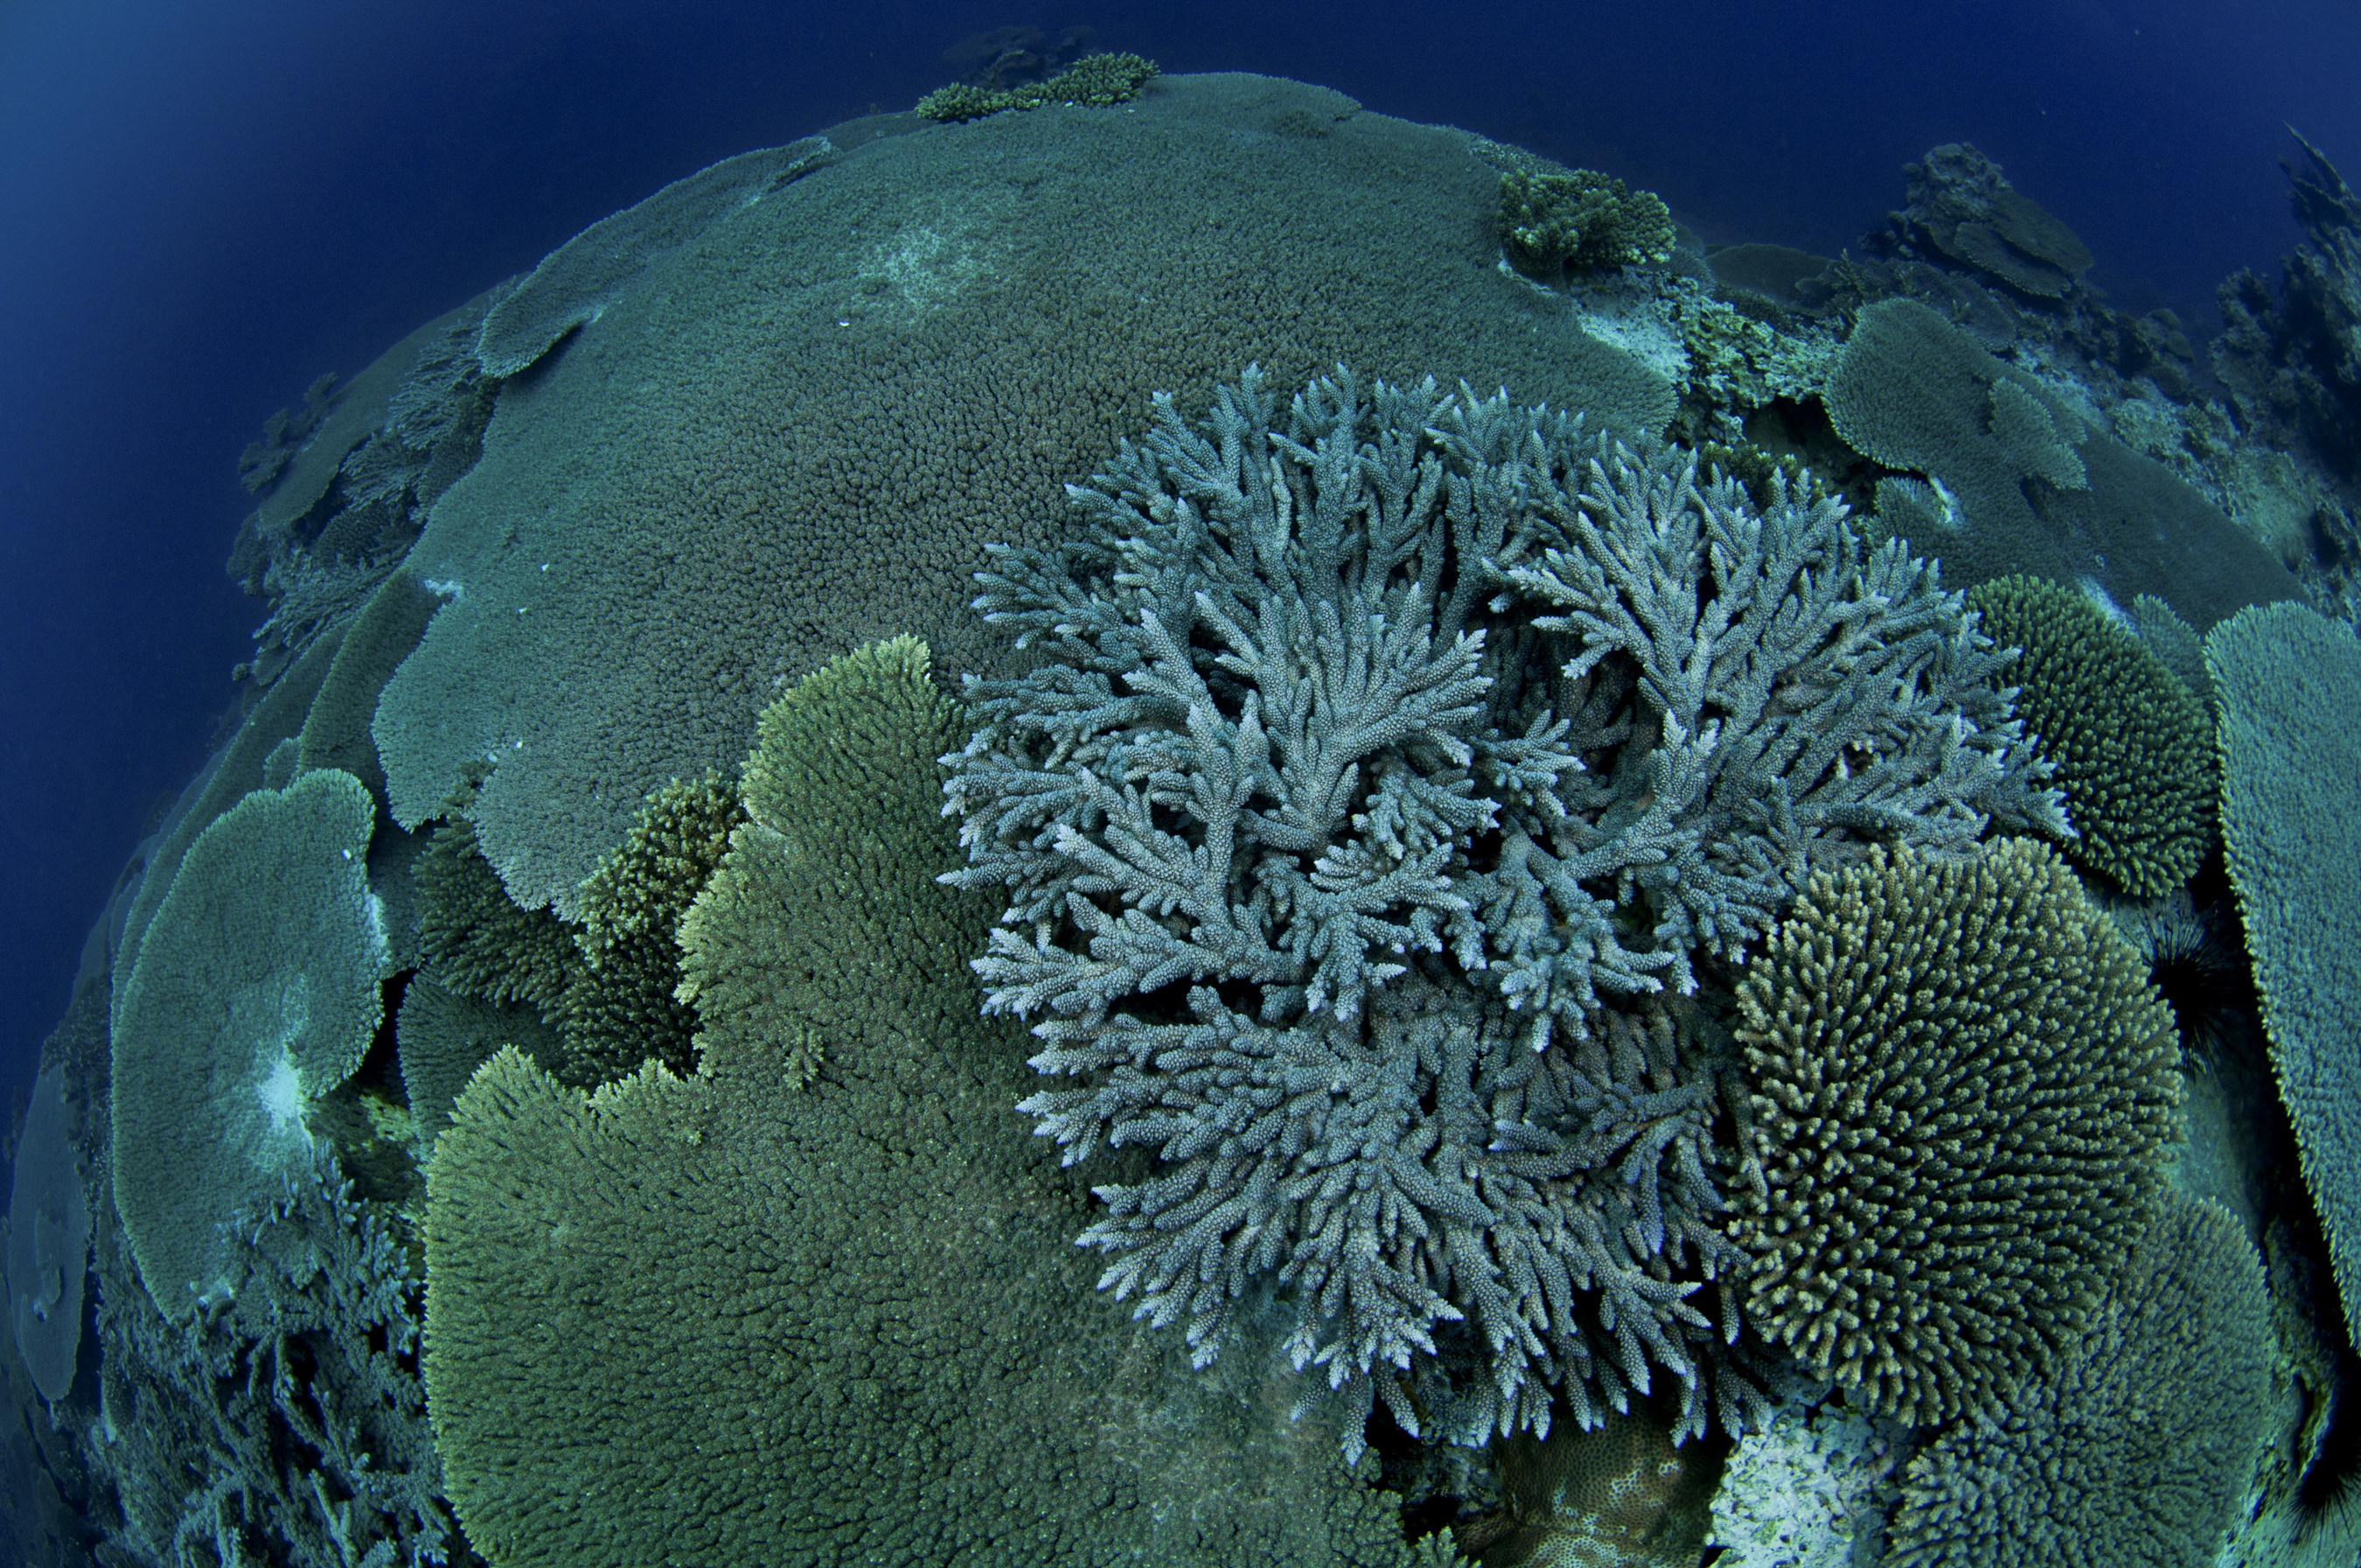 Coral reef in the Austral islands